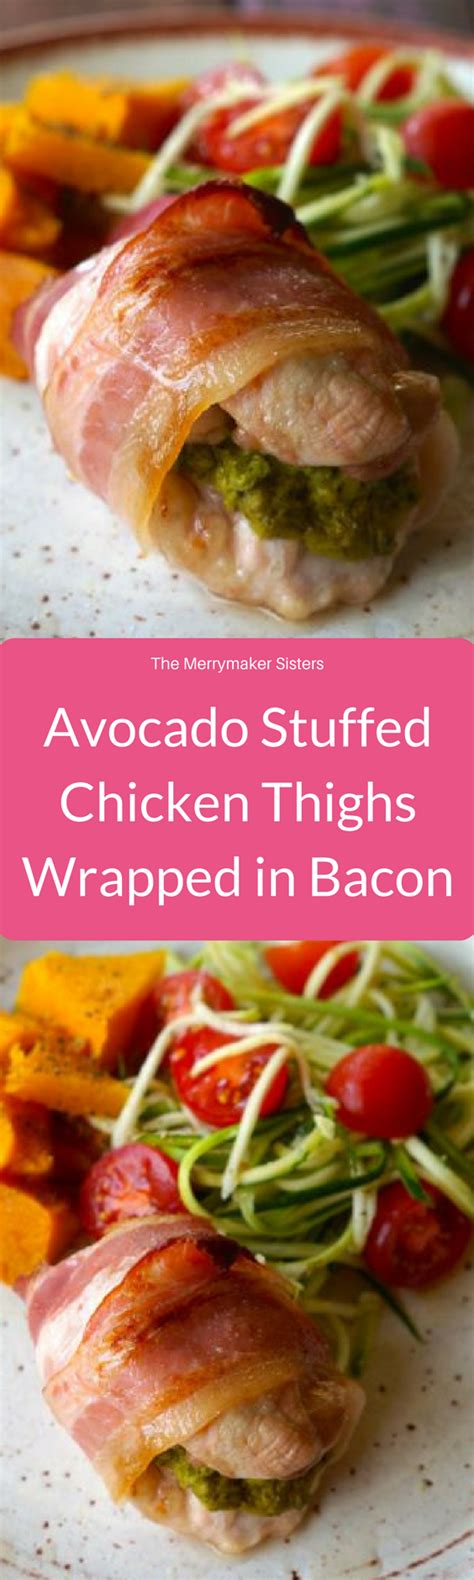 Avocado Stuffed Chicken Thighs Wrapped In Bacon Recipe Paleo